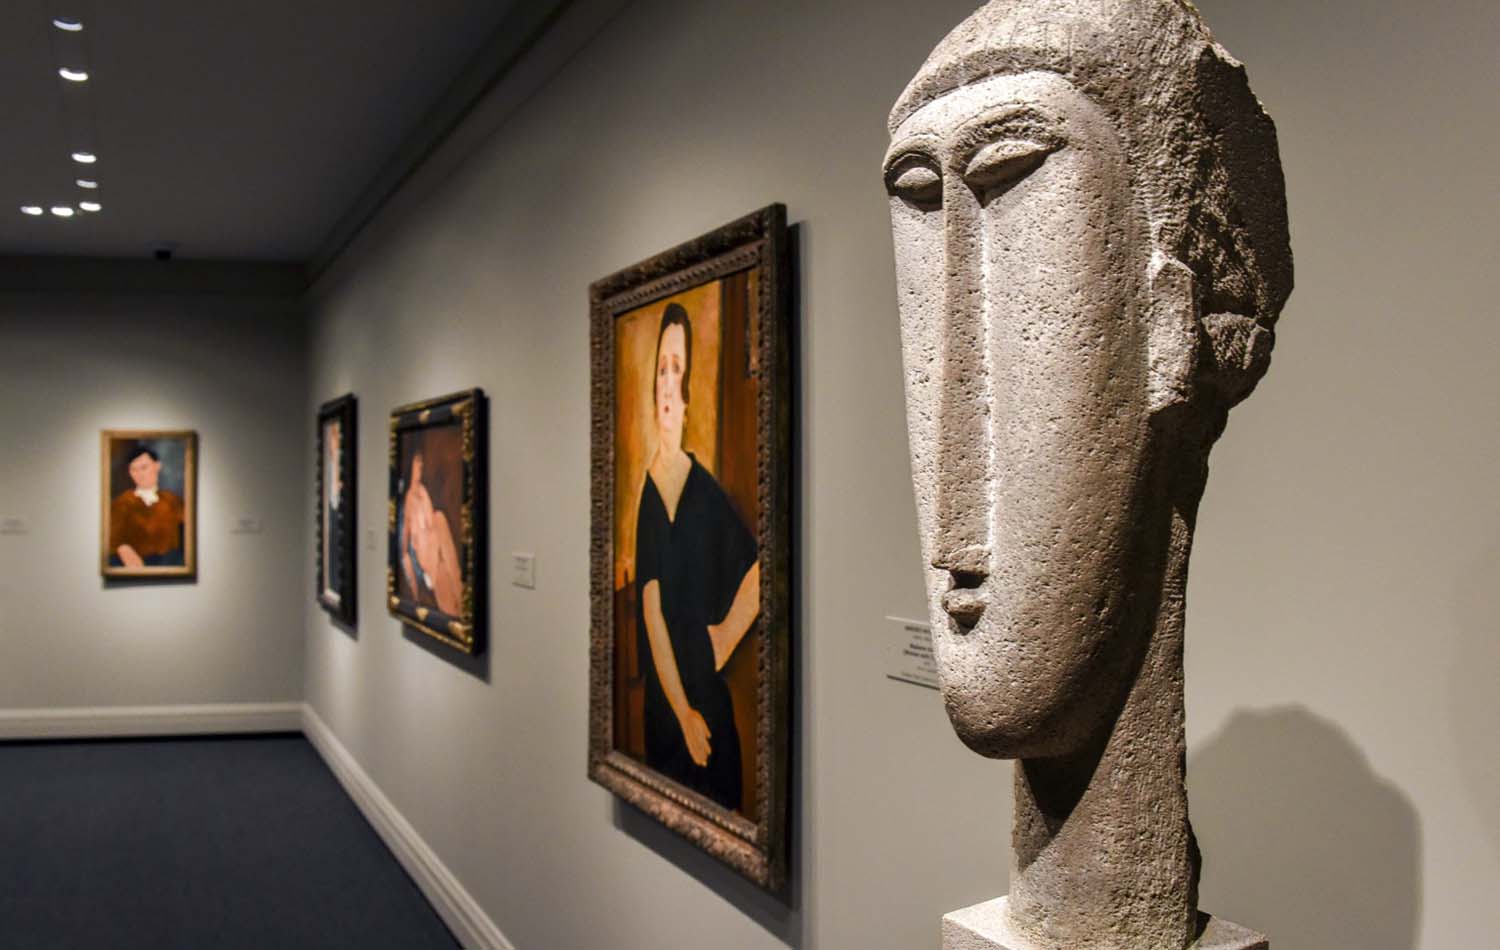  A stunning room devoted entirely to Modigliani is located on the ground level. (Bill O'Leary/The Washington Post) 